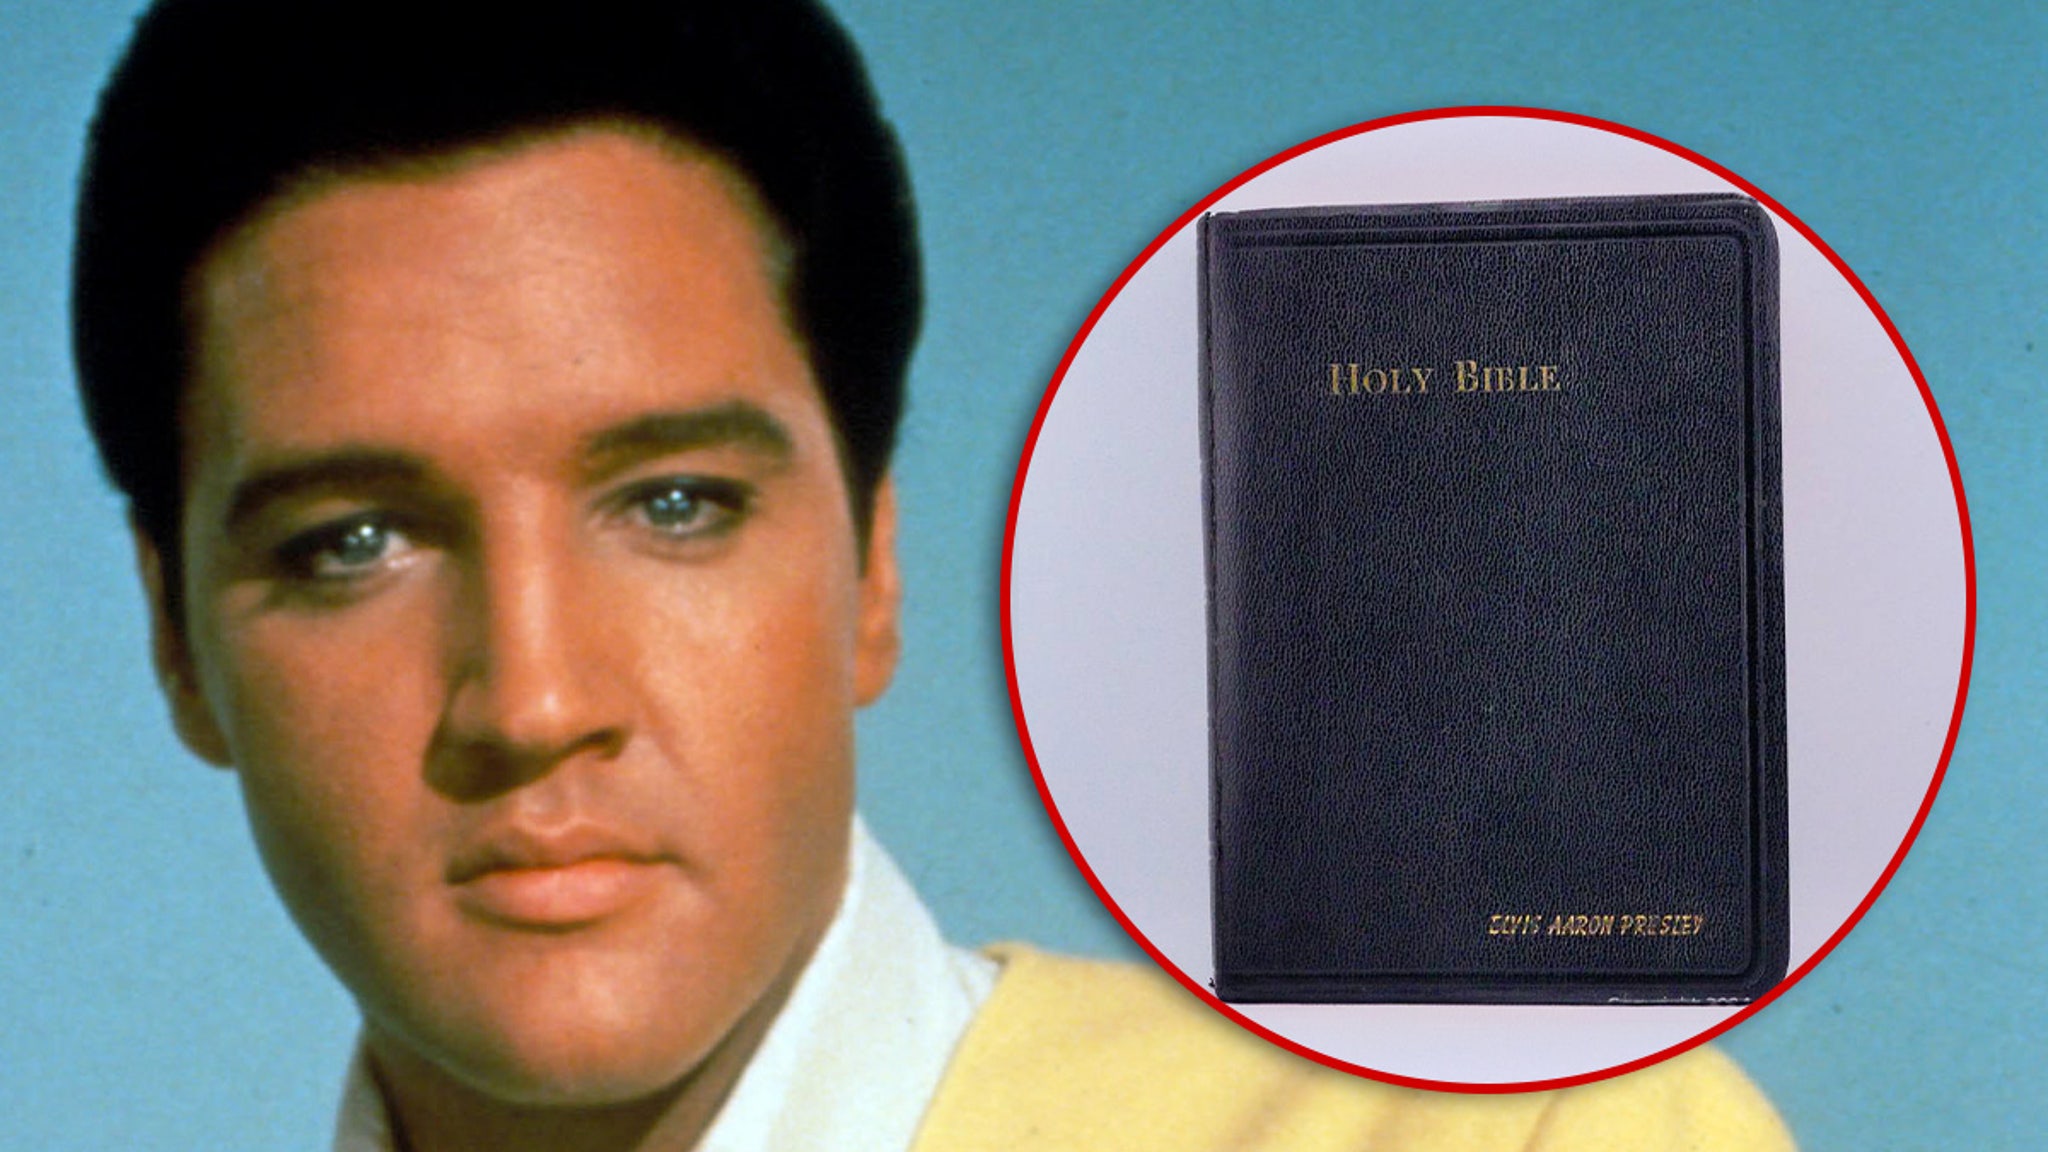 Elvis Presley's Night Bible from Graceland up for auction